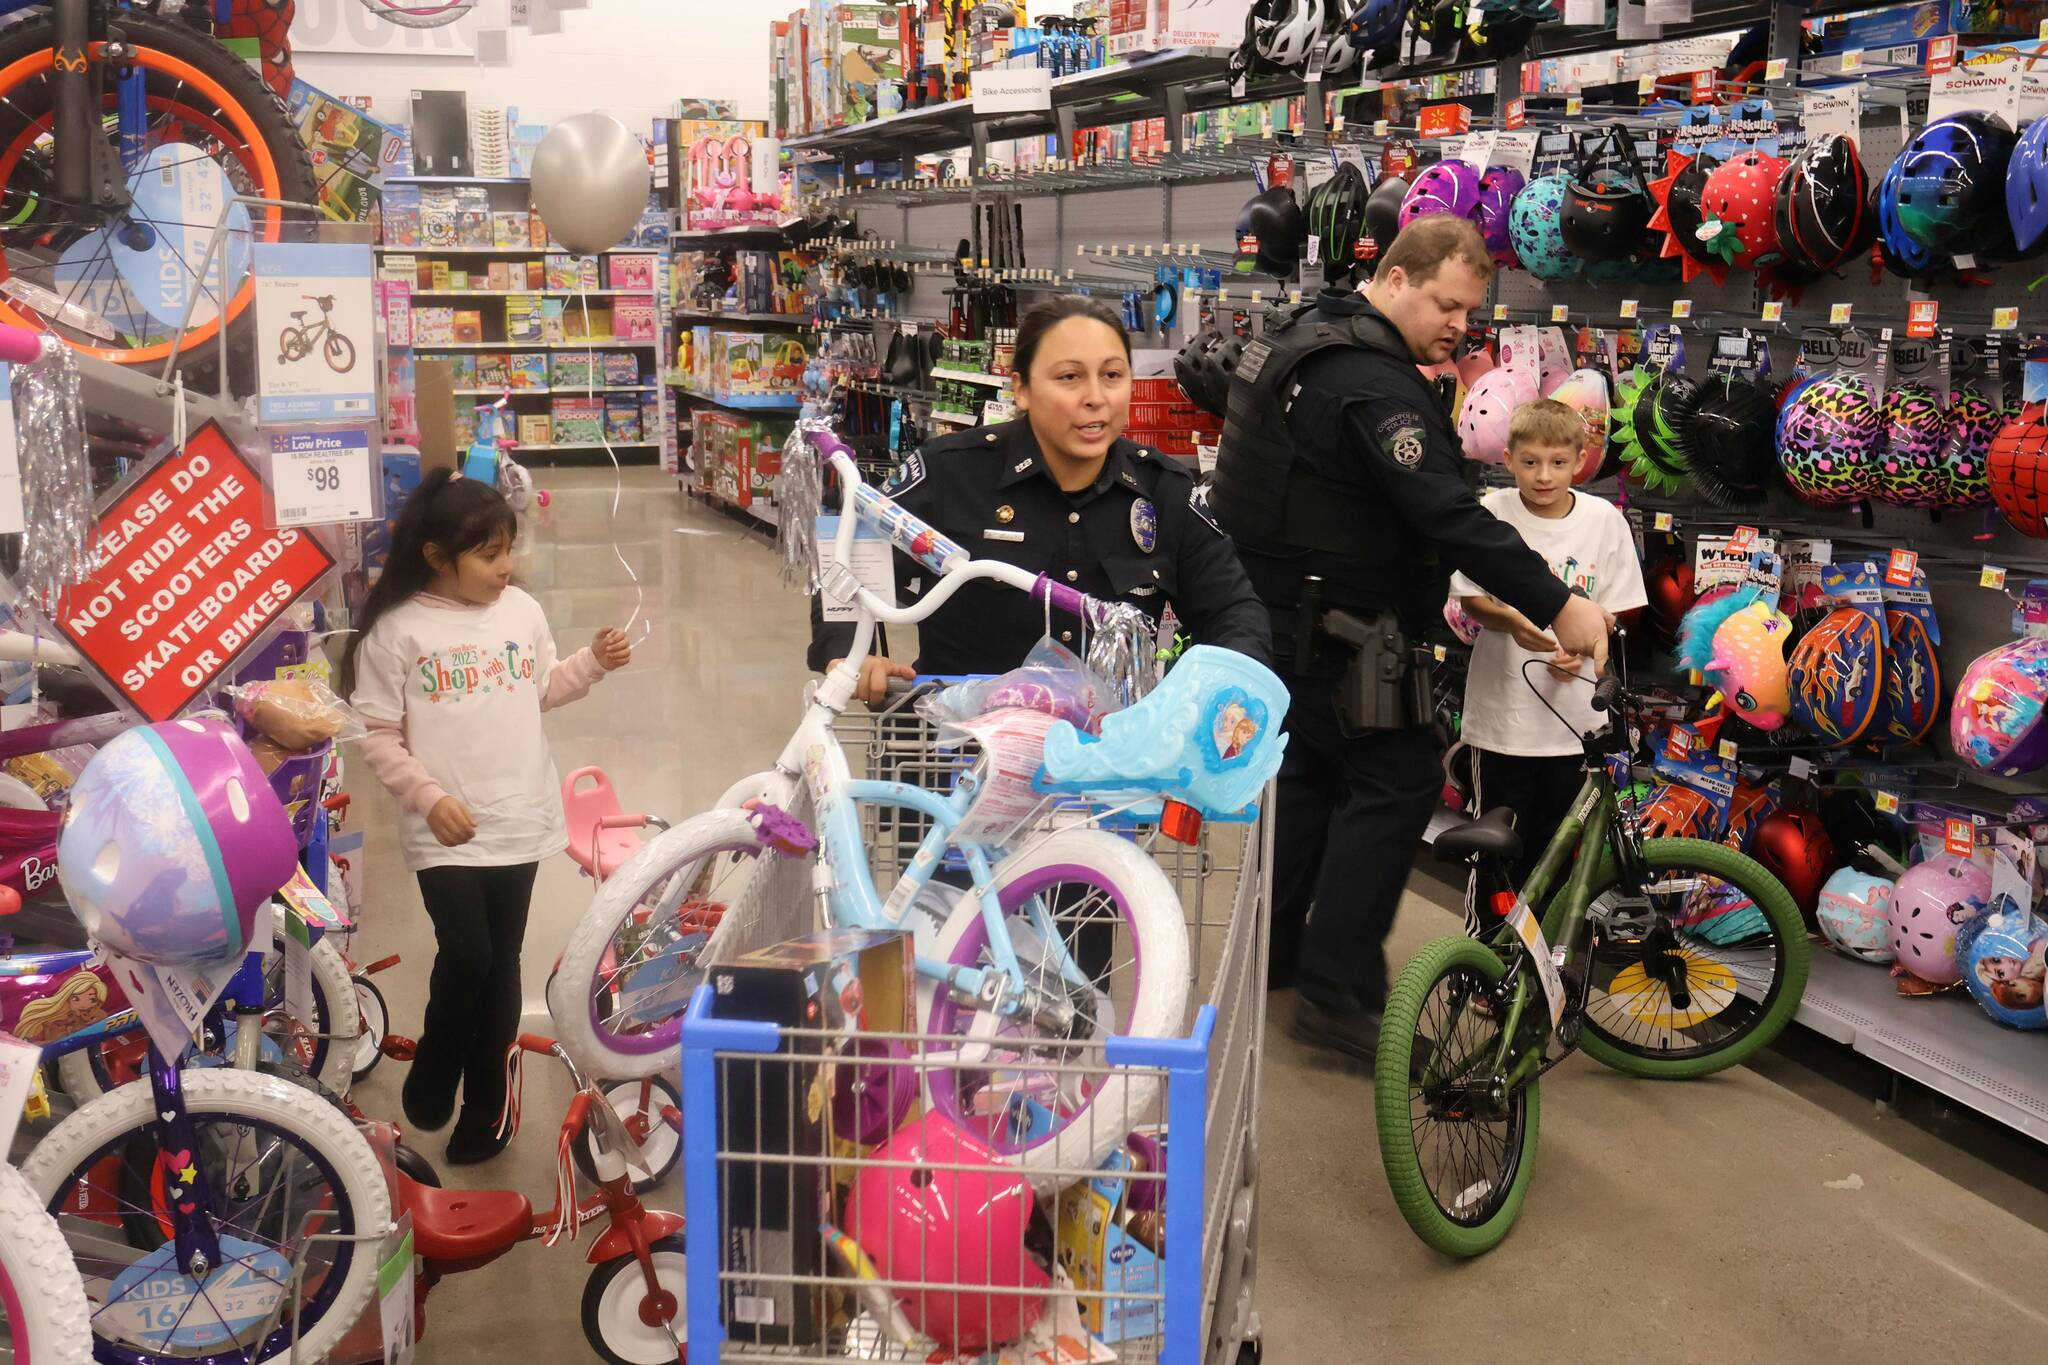 Law enforcement personnel and children buddied up for the annual Shop with a Cop event on Saturday. (Michael S. Lockett / The Daily World)